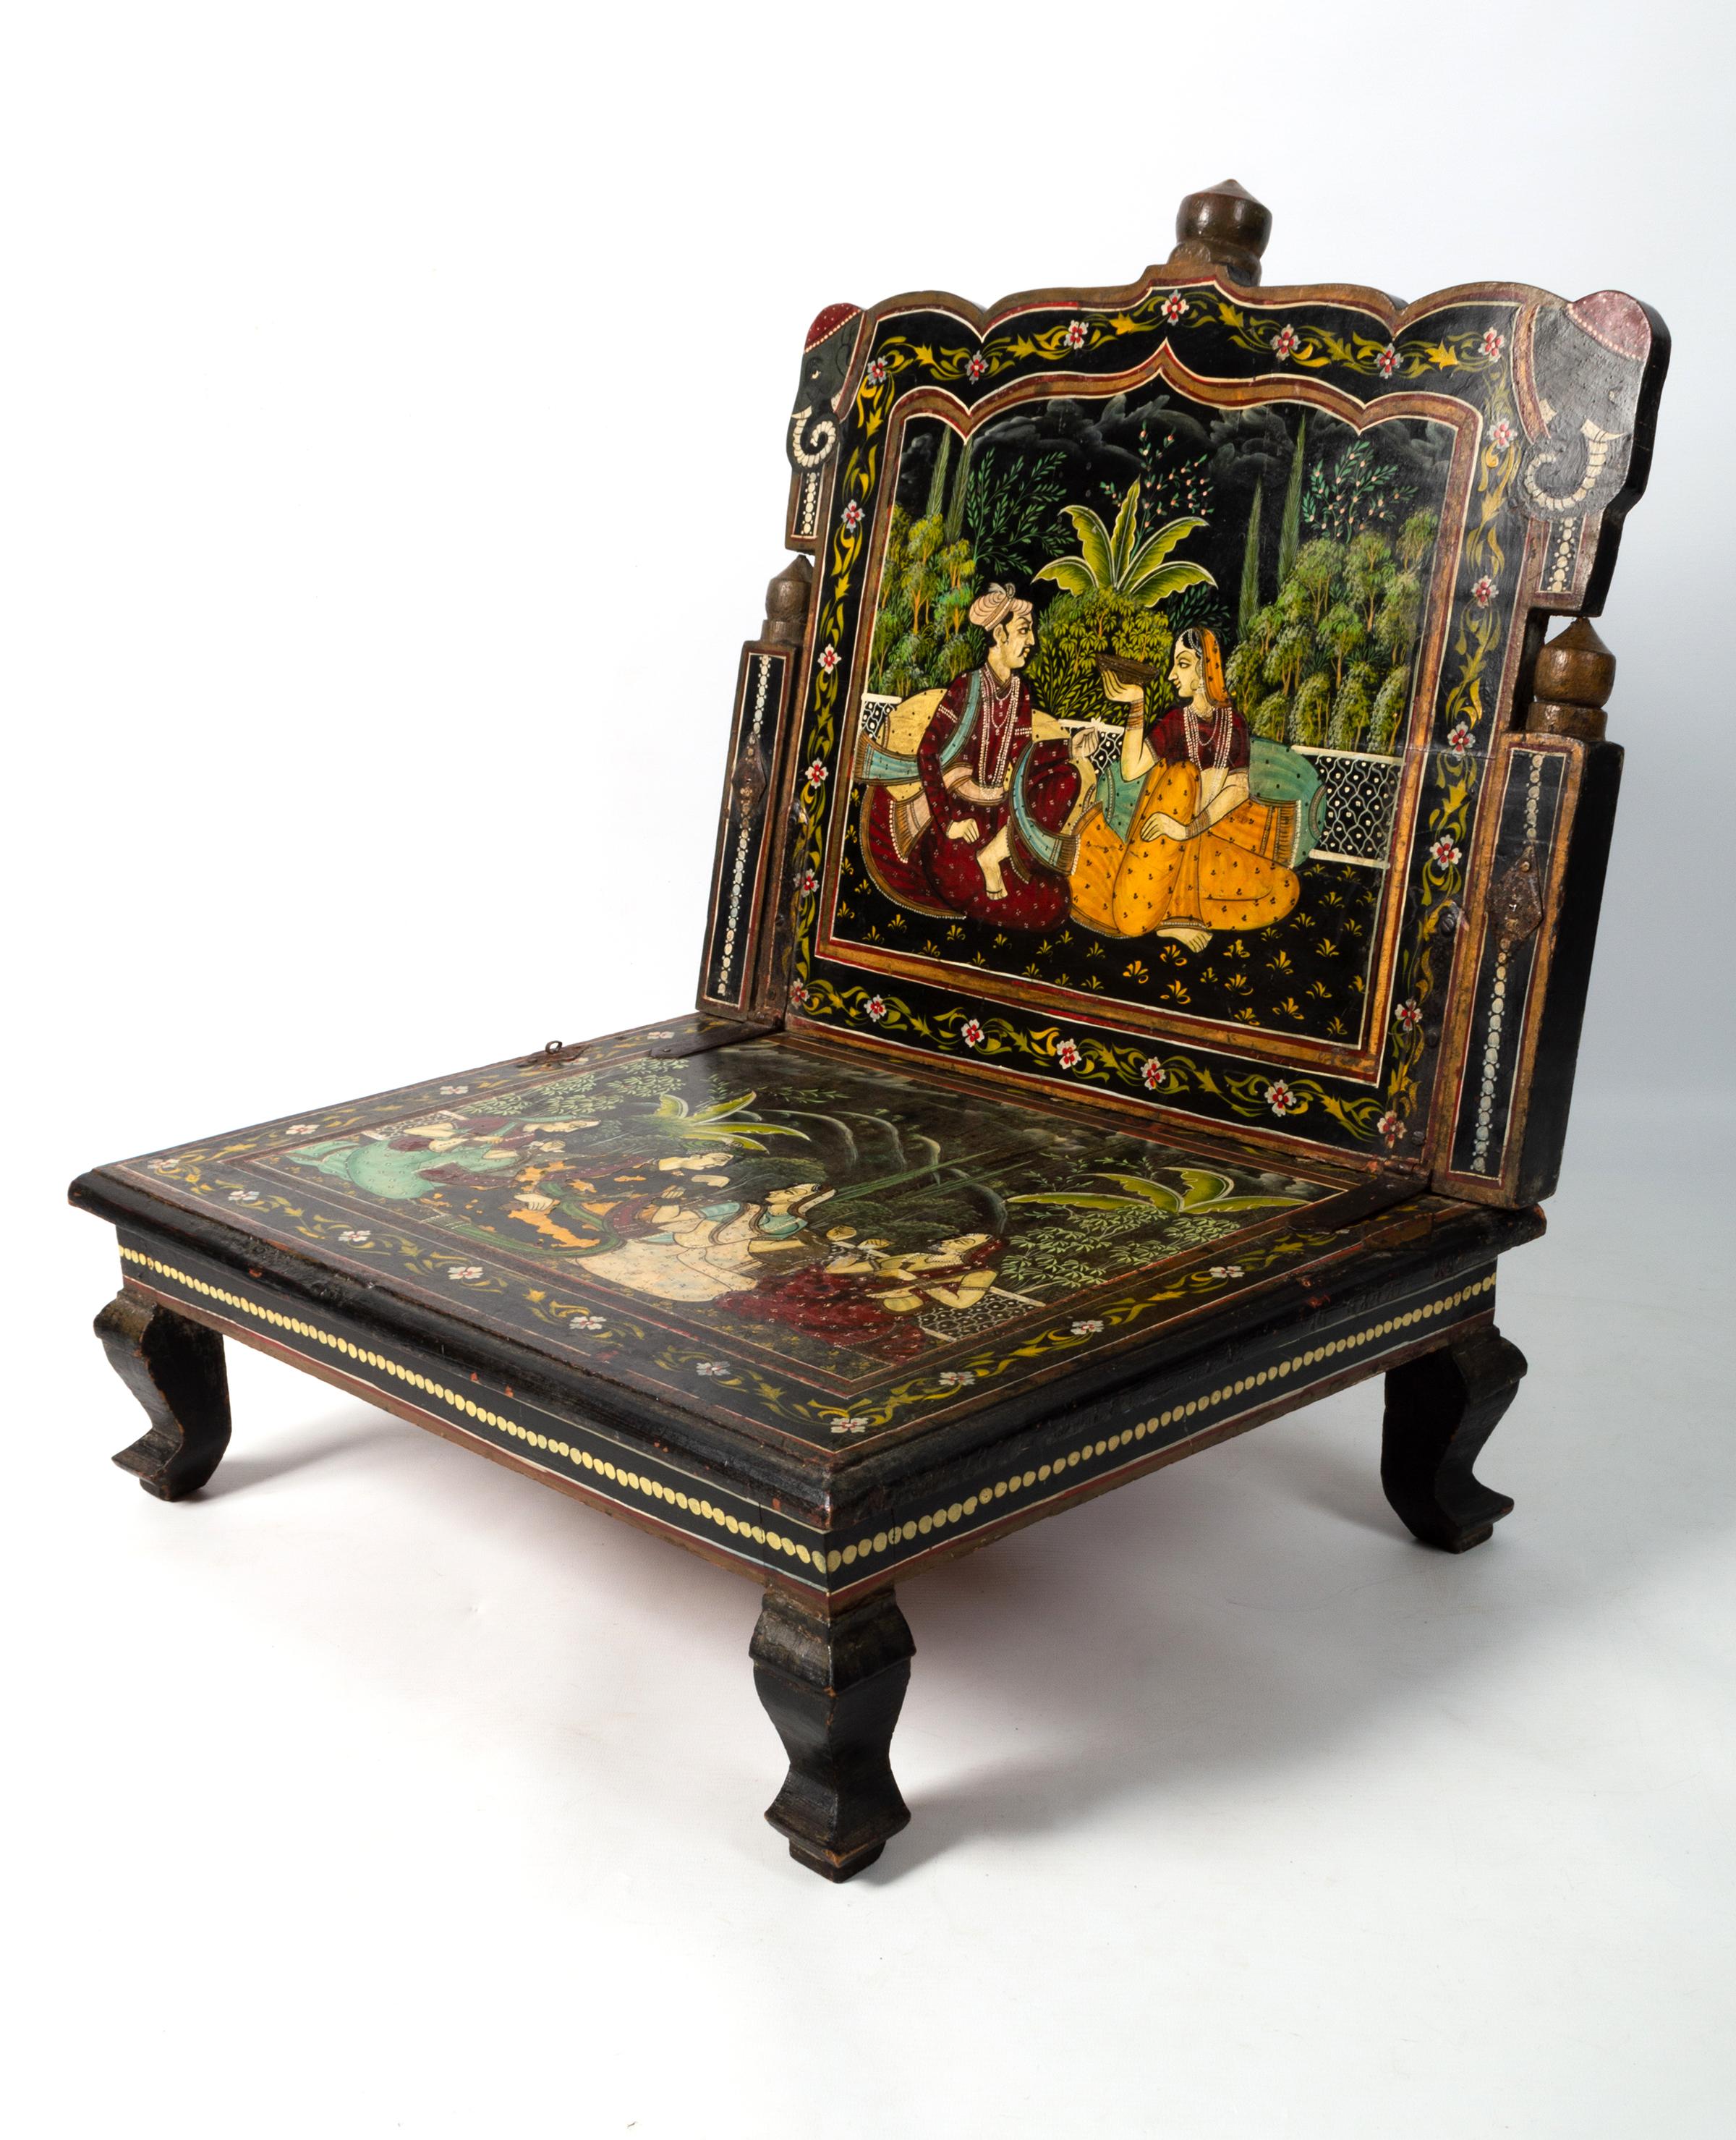 Antique Anglo-Indian Rajasthani Painted Mughal Scene Folding Decorative Chair C.1920

A wonderful decorators piece. Structurally sound, missing back support hooks, therefore recommended for decorative purposes, and not for general seating.

Well